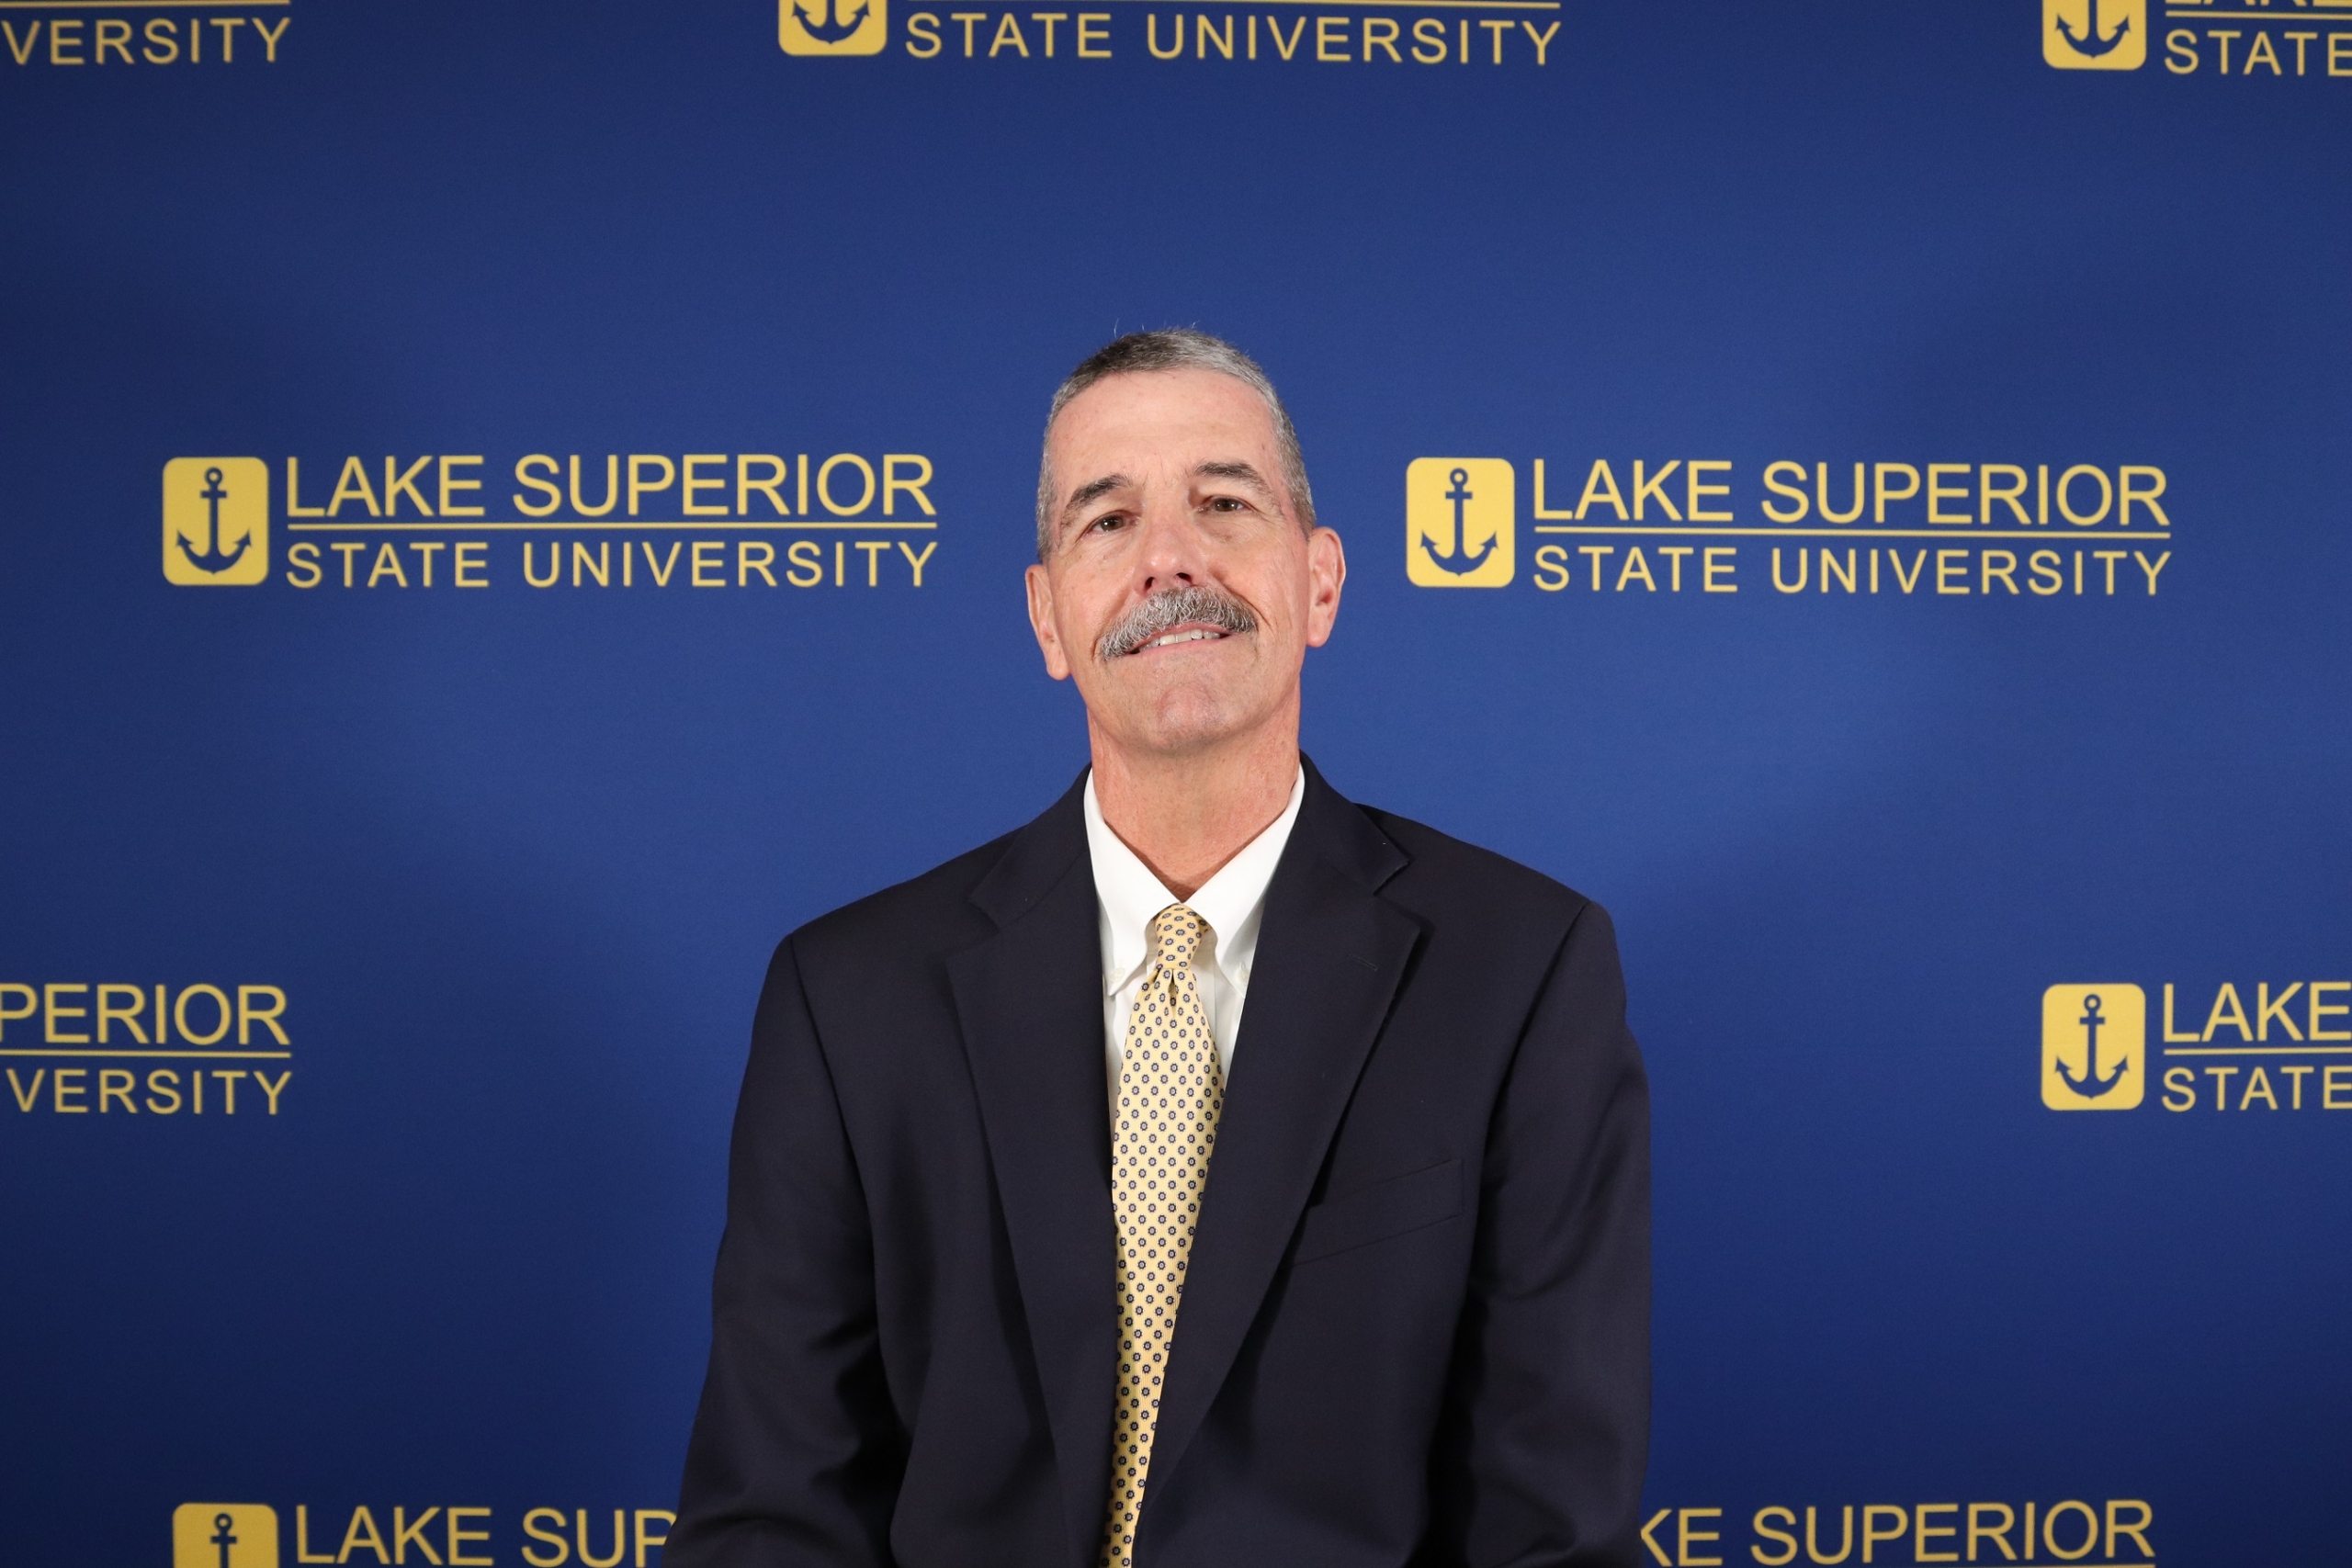 Lake Superior State University president resigns, seeks new opportunities